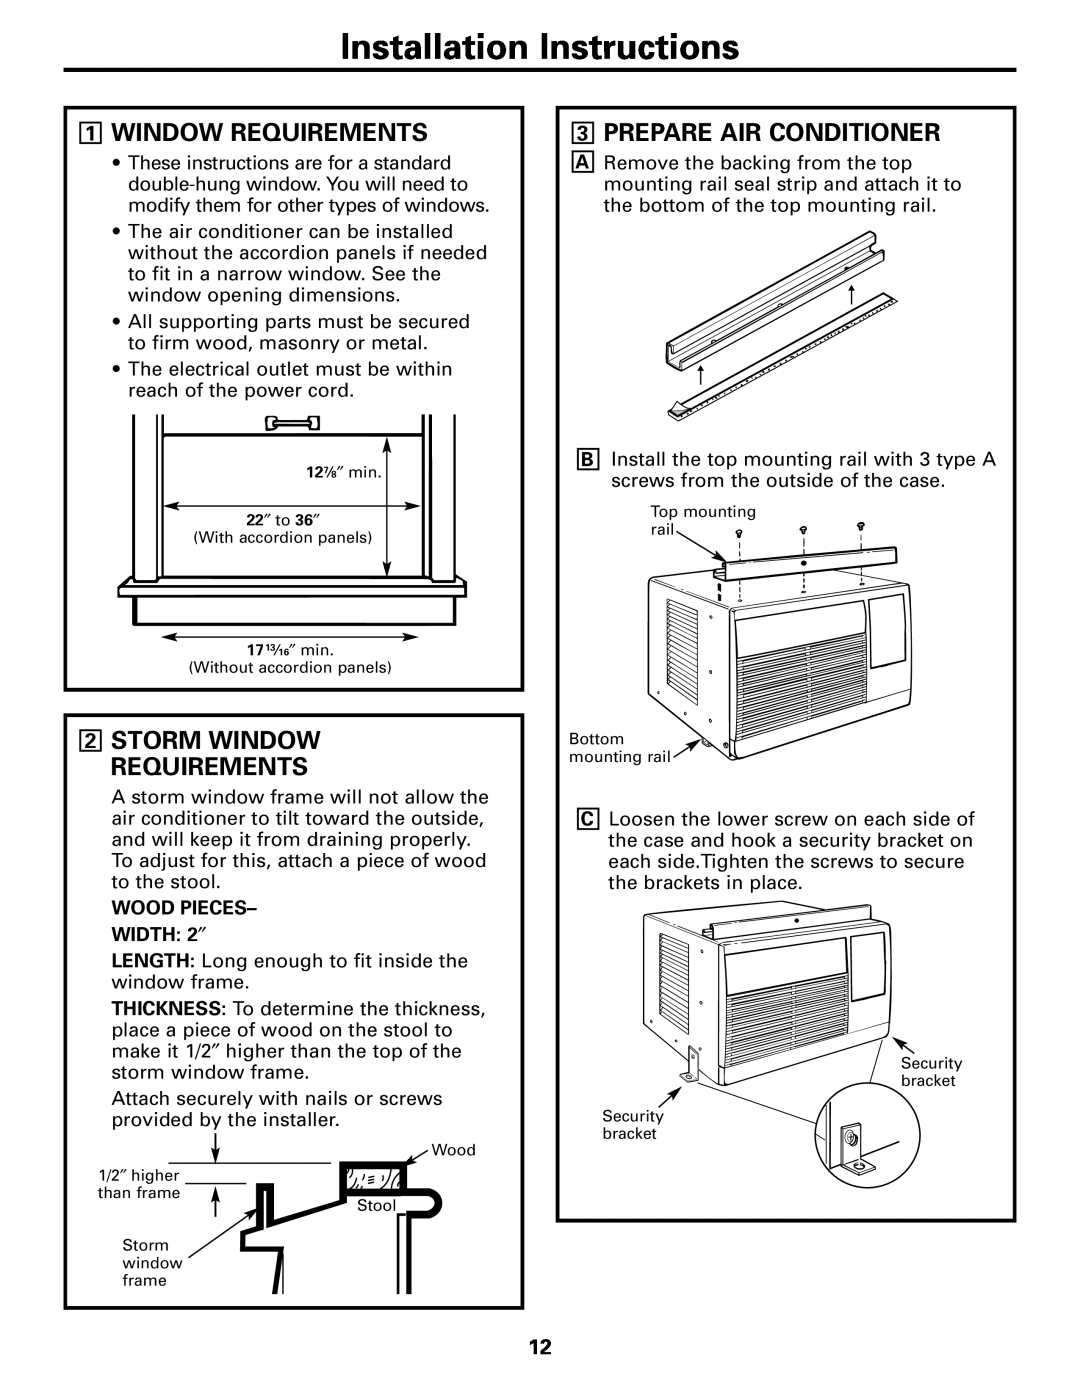 GE ASM05, ASN06 Installation Instructions, 1WINDOW REQUIREMENTS, 2STORM WINDOW REQUIREMENTS, 3PREPARE AIR CONDITIONER 